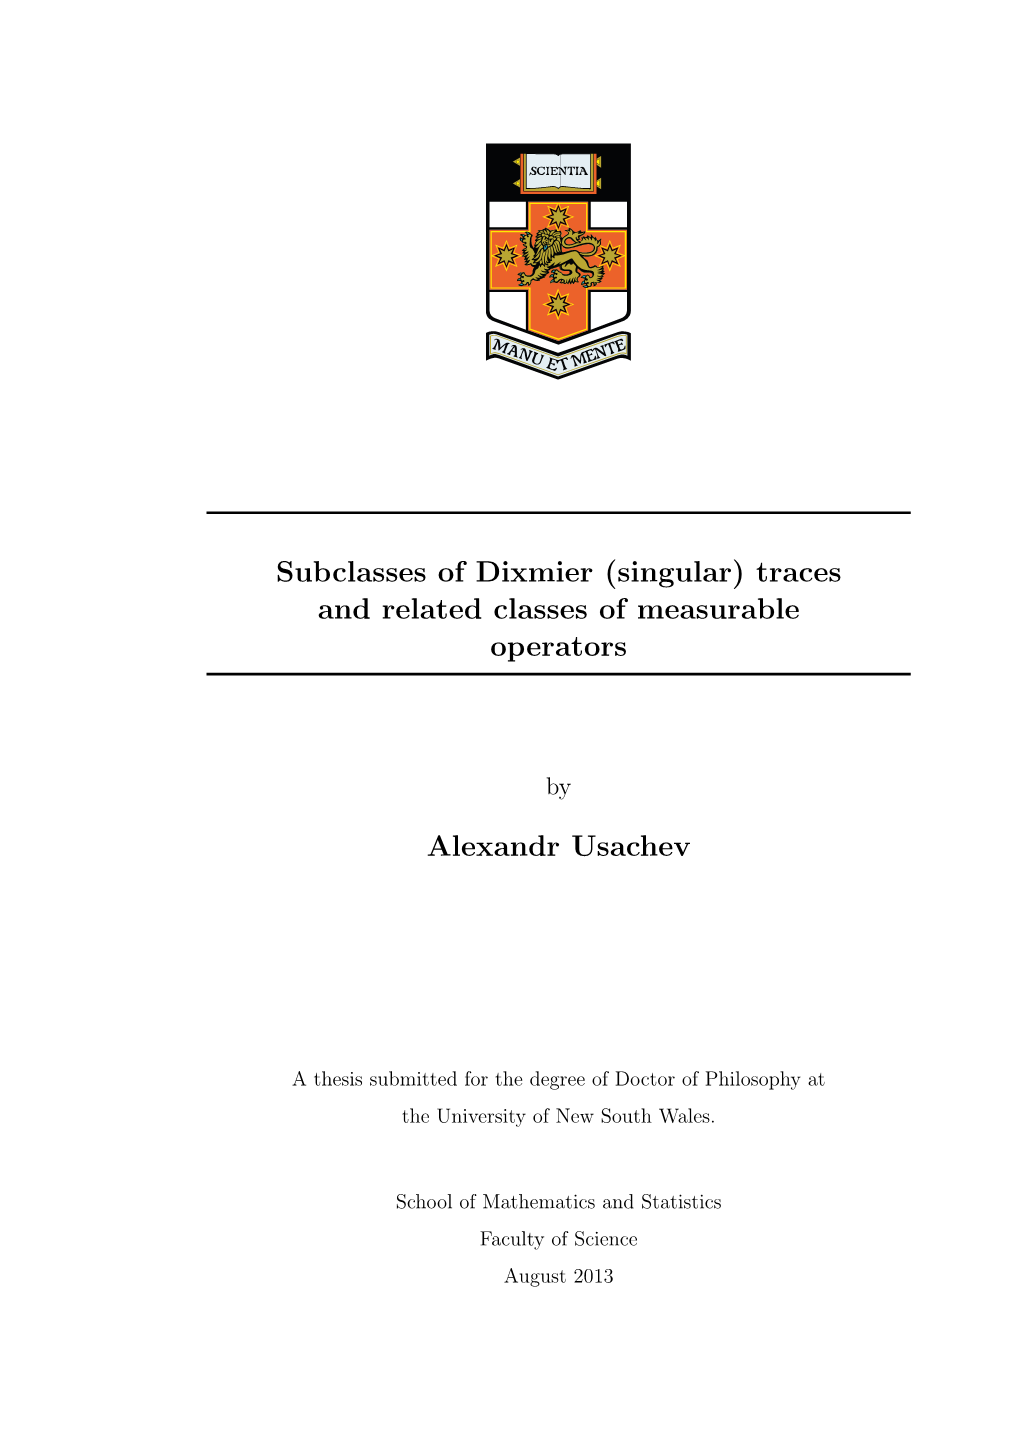 Subclasses of Dixmier (Singular) Traces and Related Classes of Measurable Operators